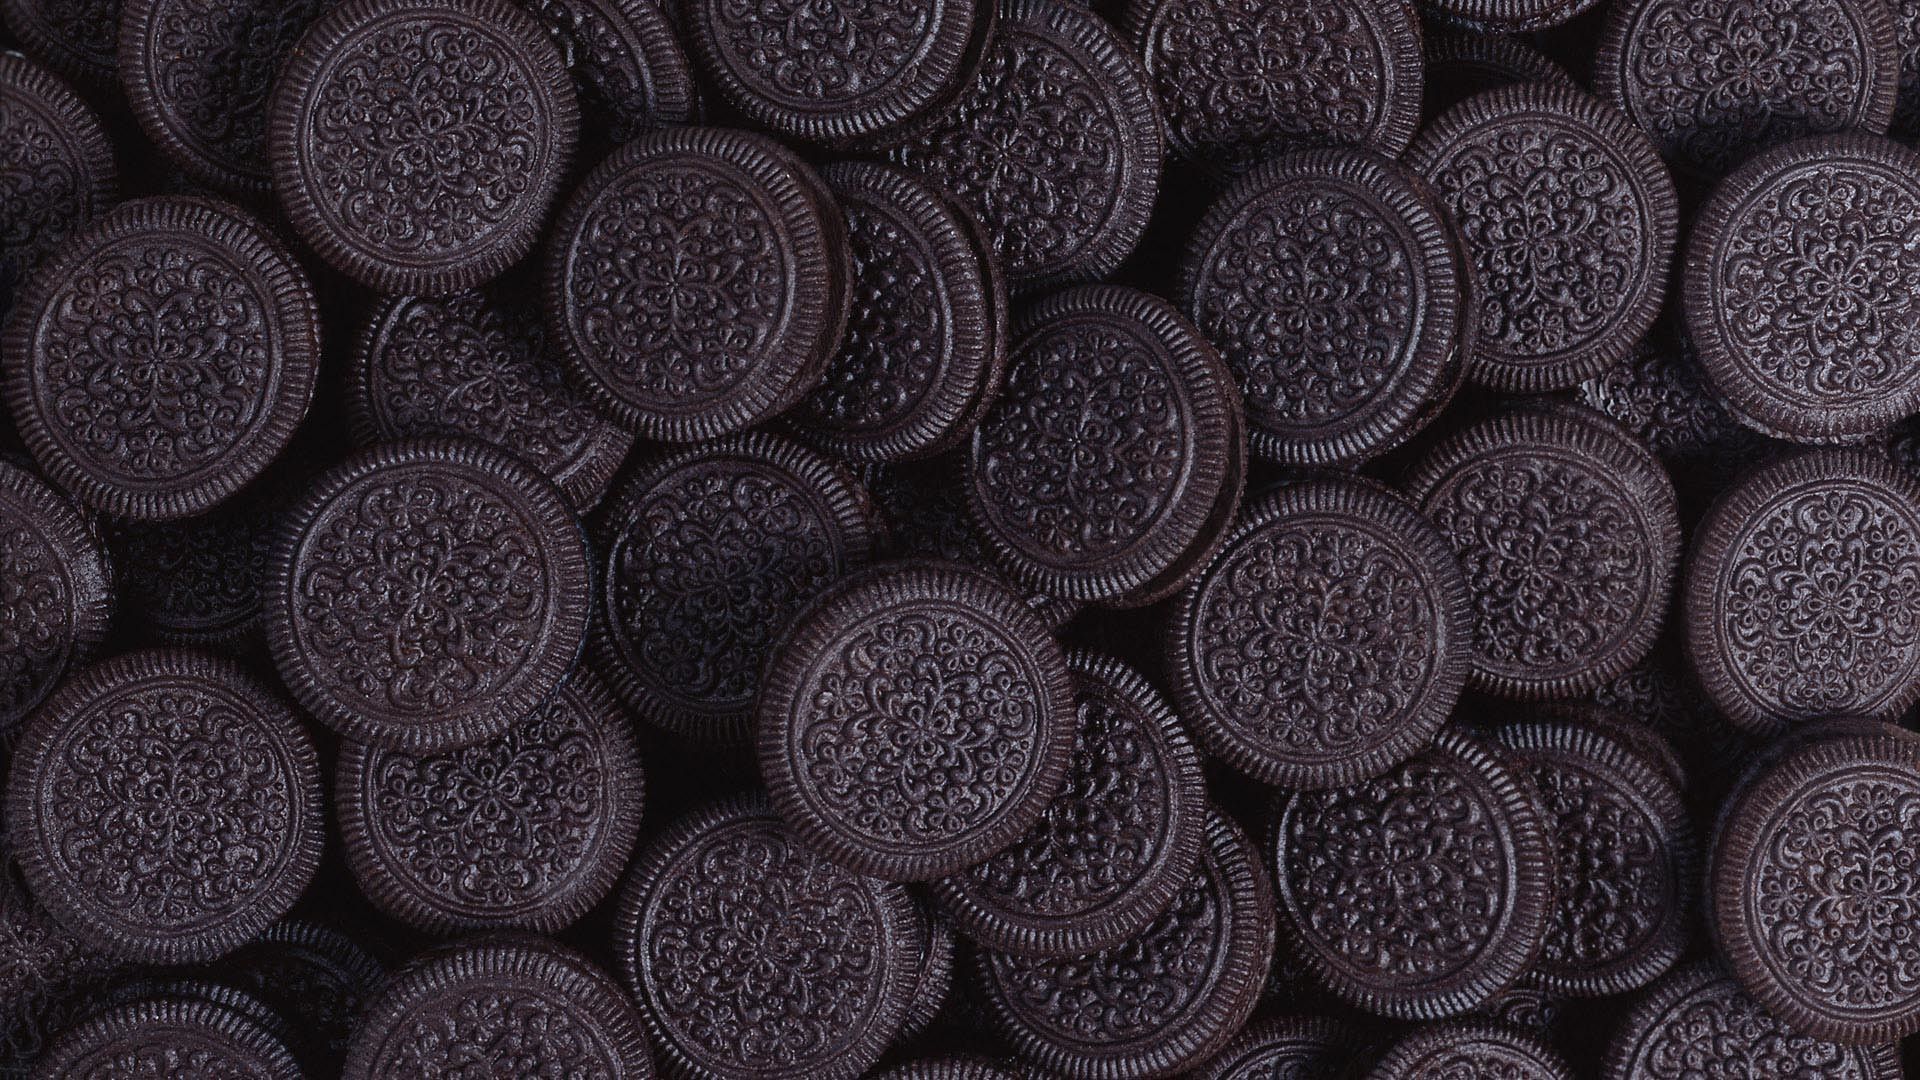 A close up of many chocolate cookies - Oreo